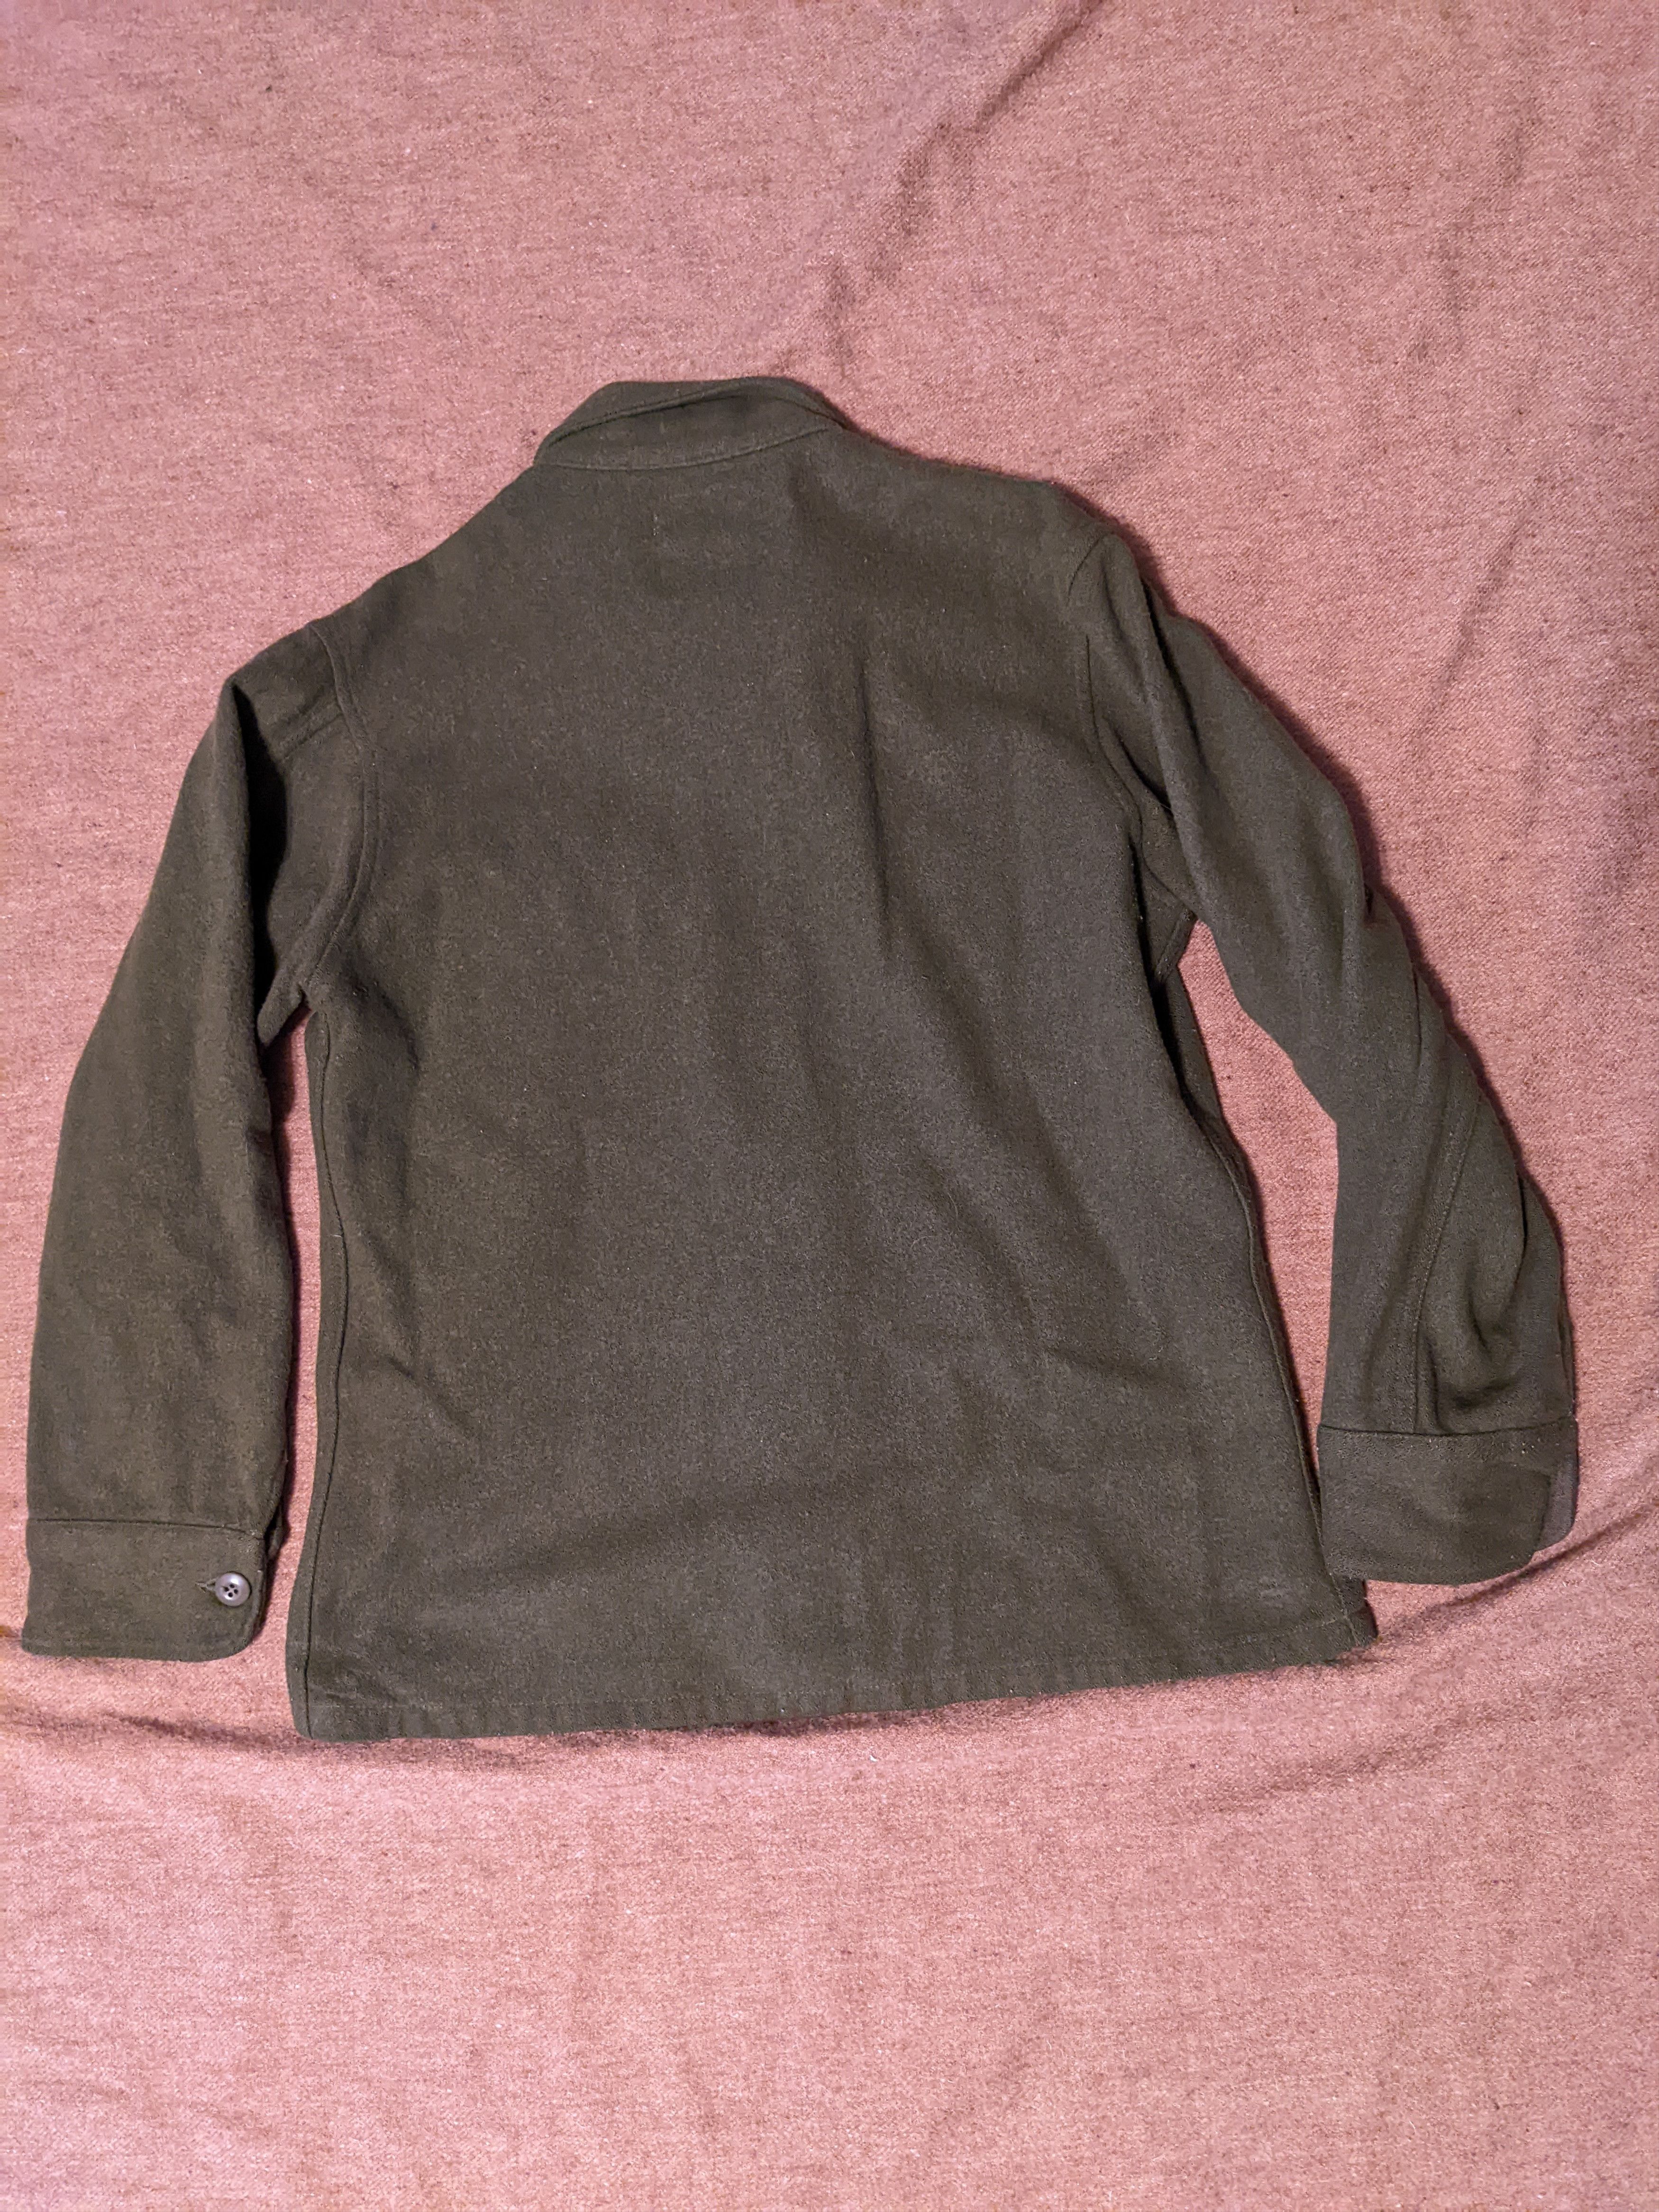 Military VINTAGE 1950's US Military Men's Wool Blend Field Shirt Size US M / EU 48-50 / 2 - 2 Preview